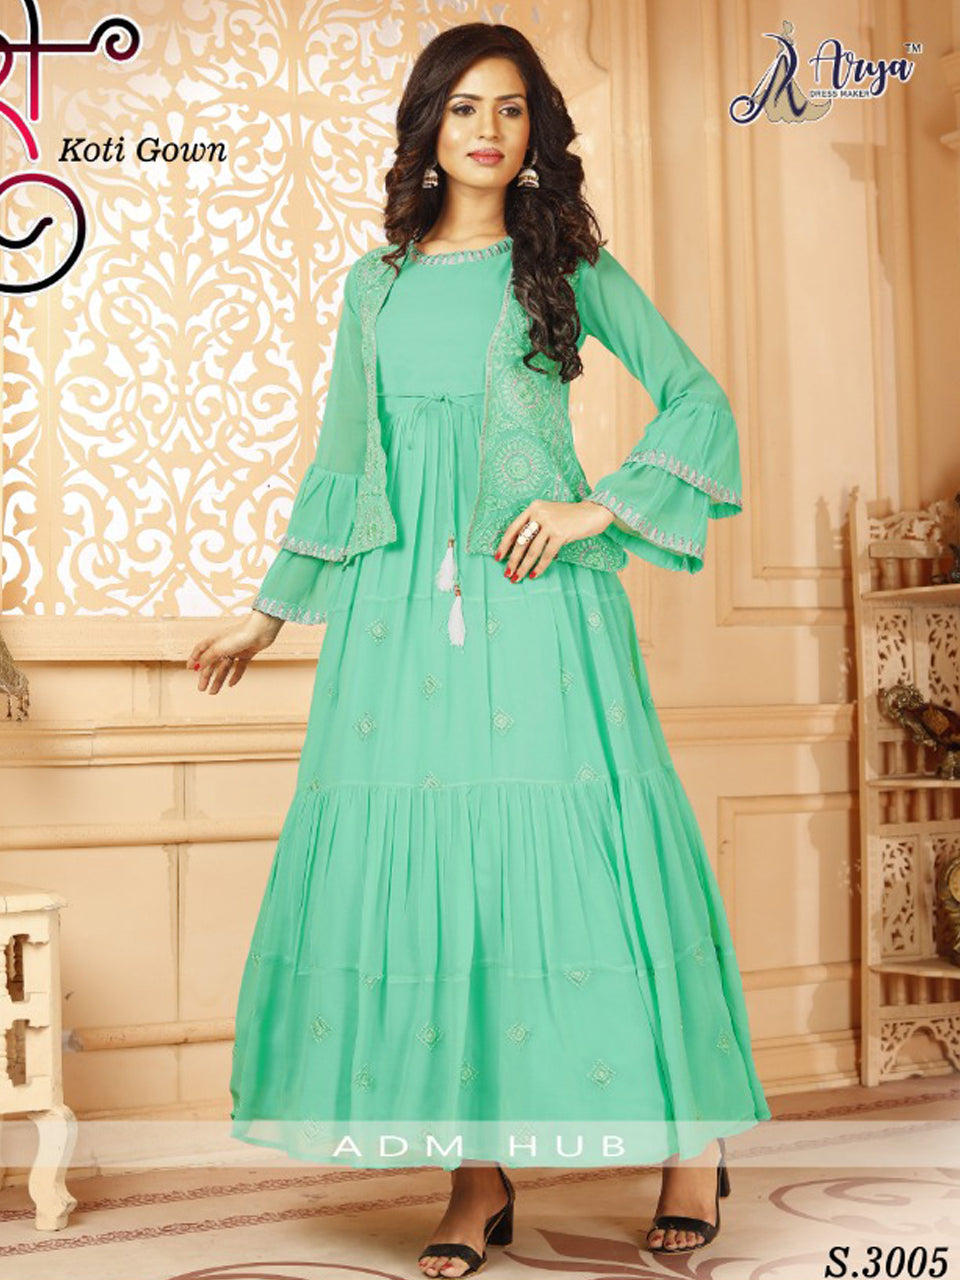 SANARI NEW TRENDY BEAUTIFUL PARTY WEAR GOWN WITH KOTI.